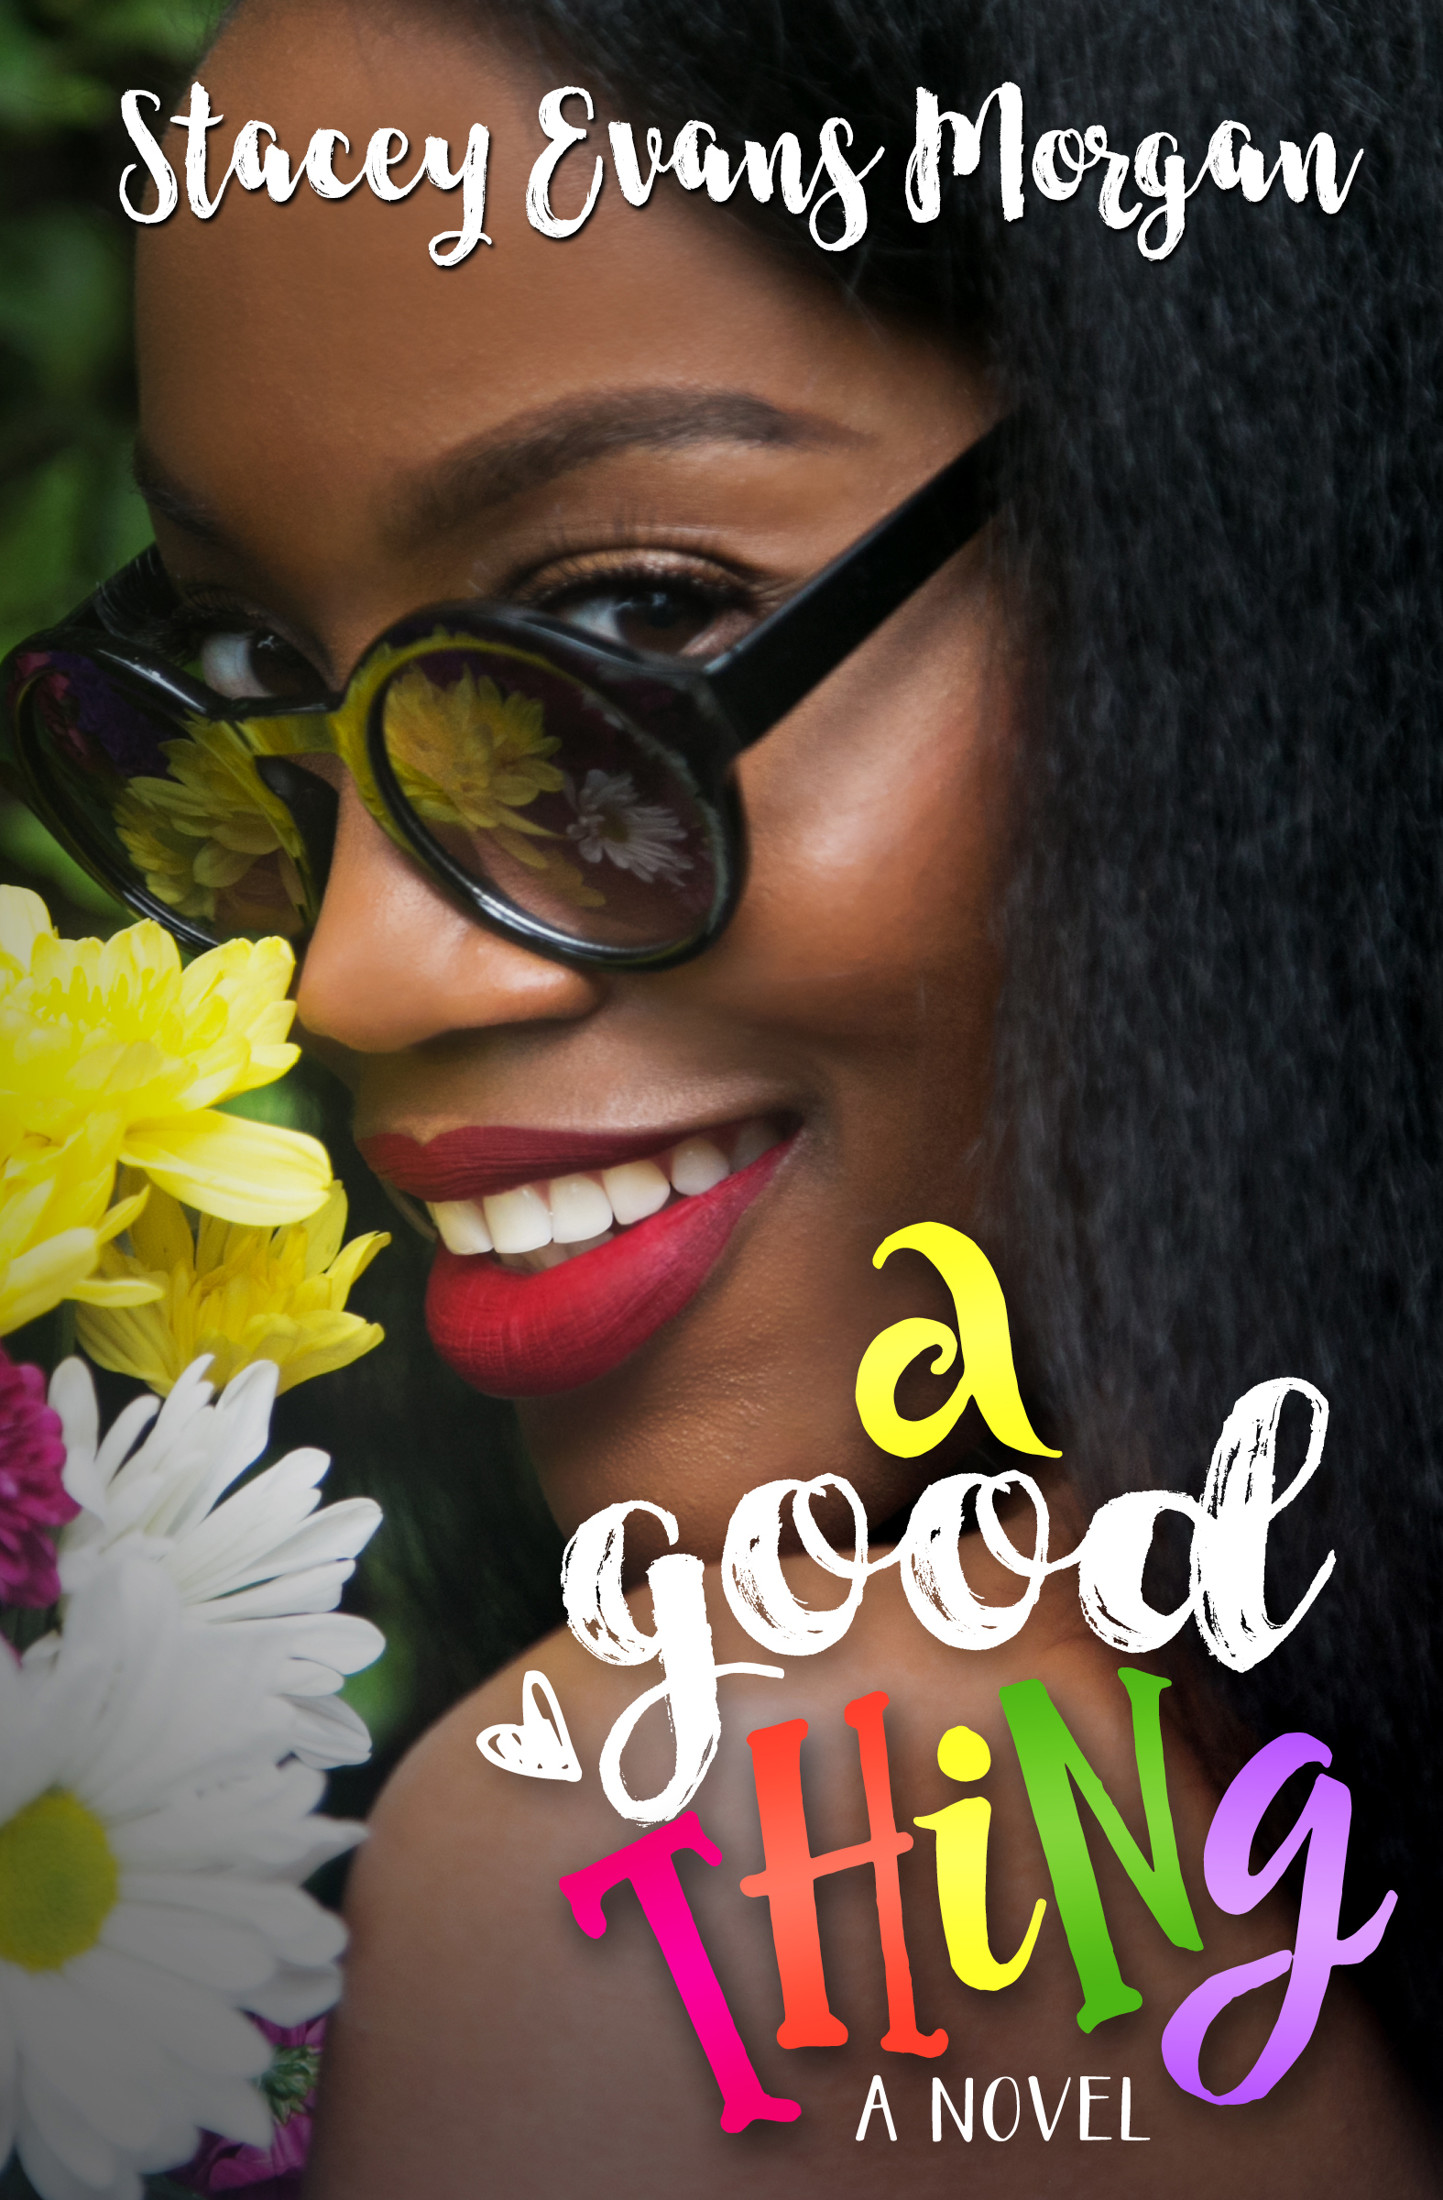 This image is the cover for the book A Good Thing